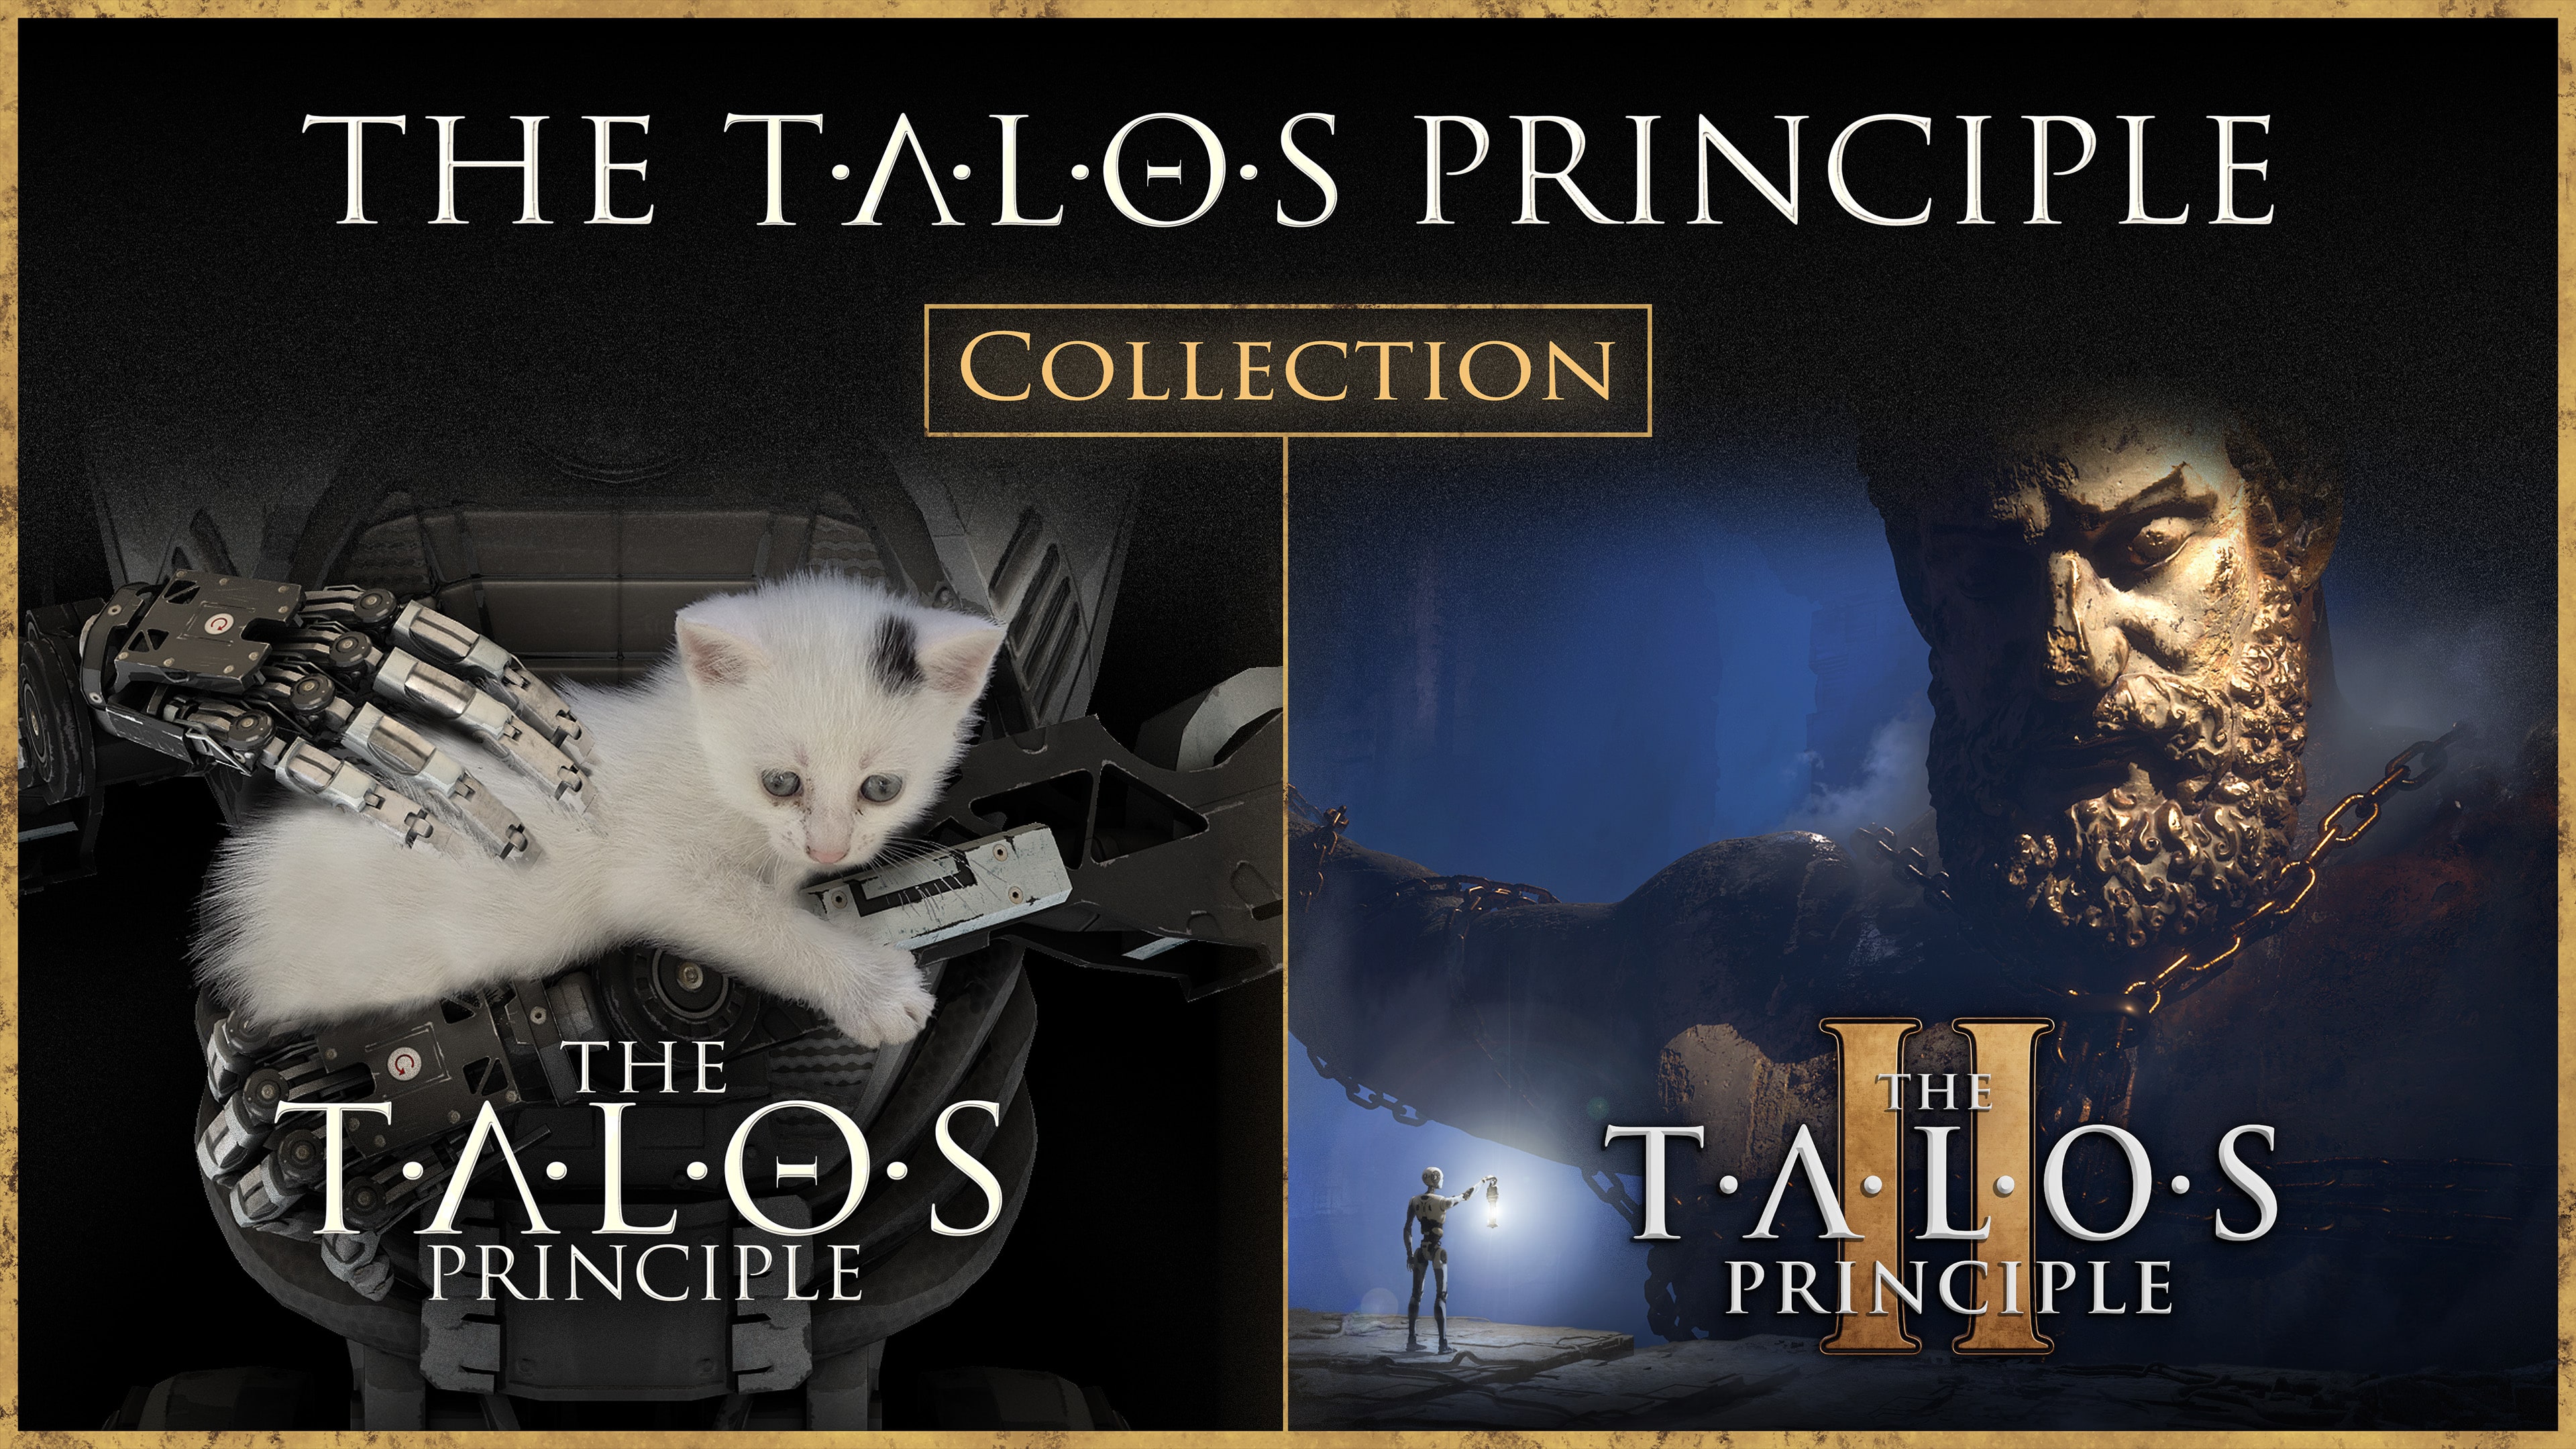 The Talos Principle Collection (Simplified Chinese, English, Korean, Japanese, Traditional Chinese)